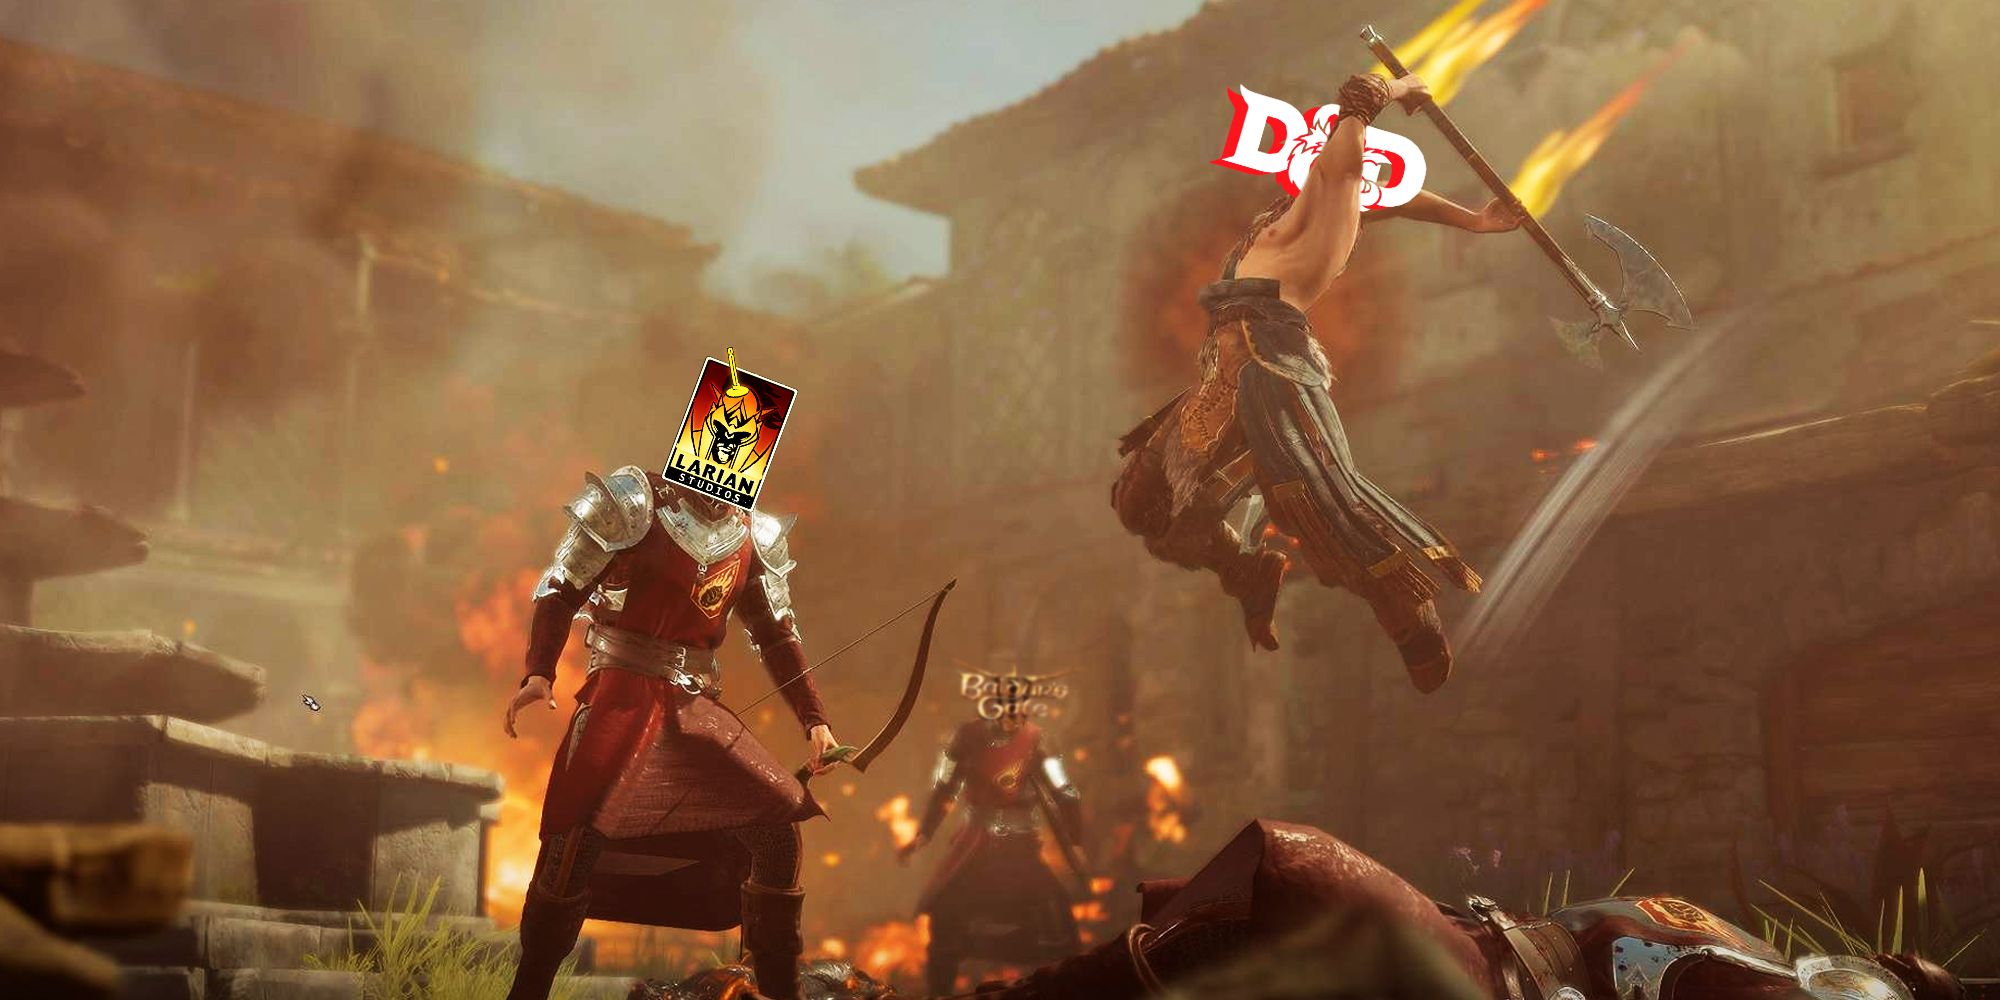 D&D 5th Edition logo as a barbarian leaping to attack Larian Studios